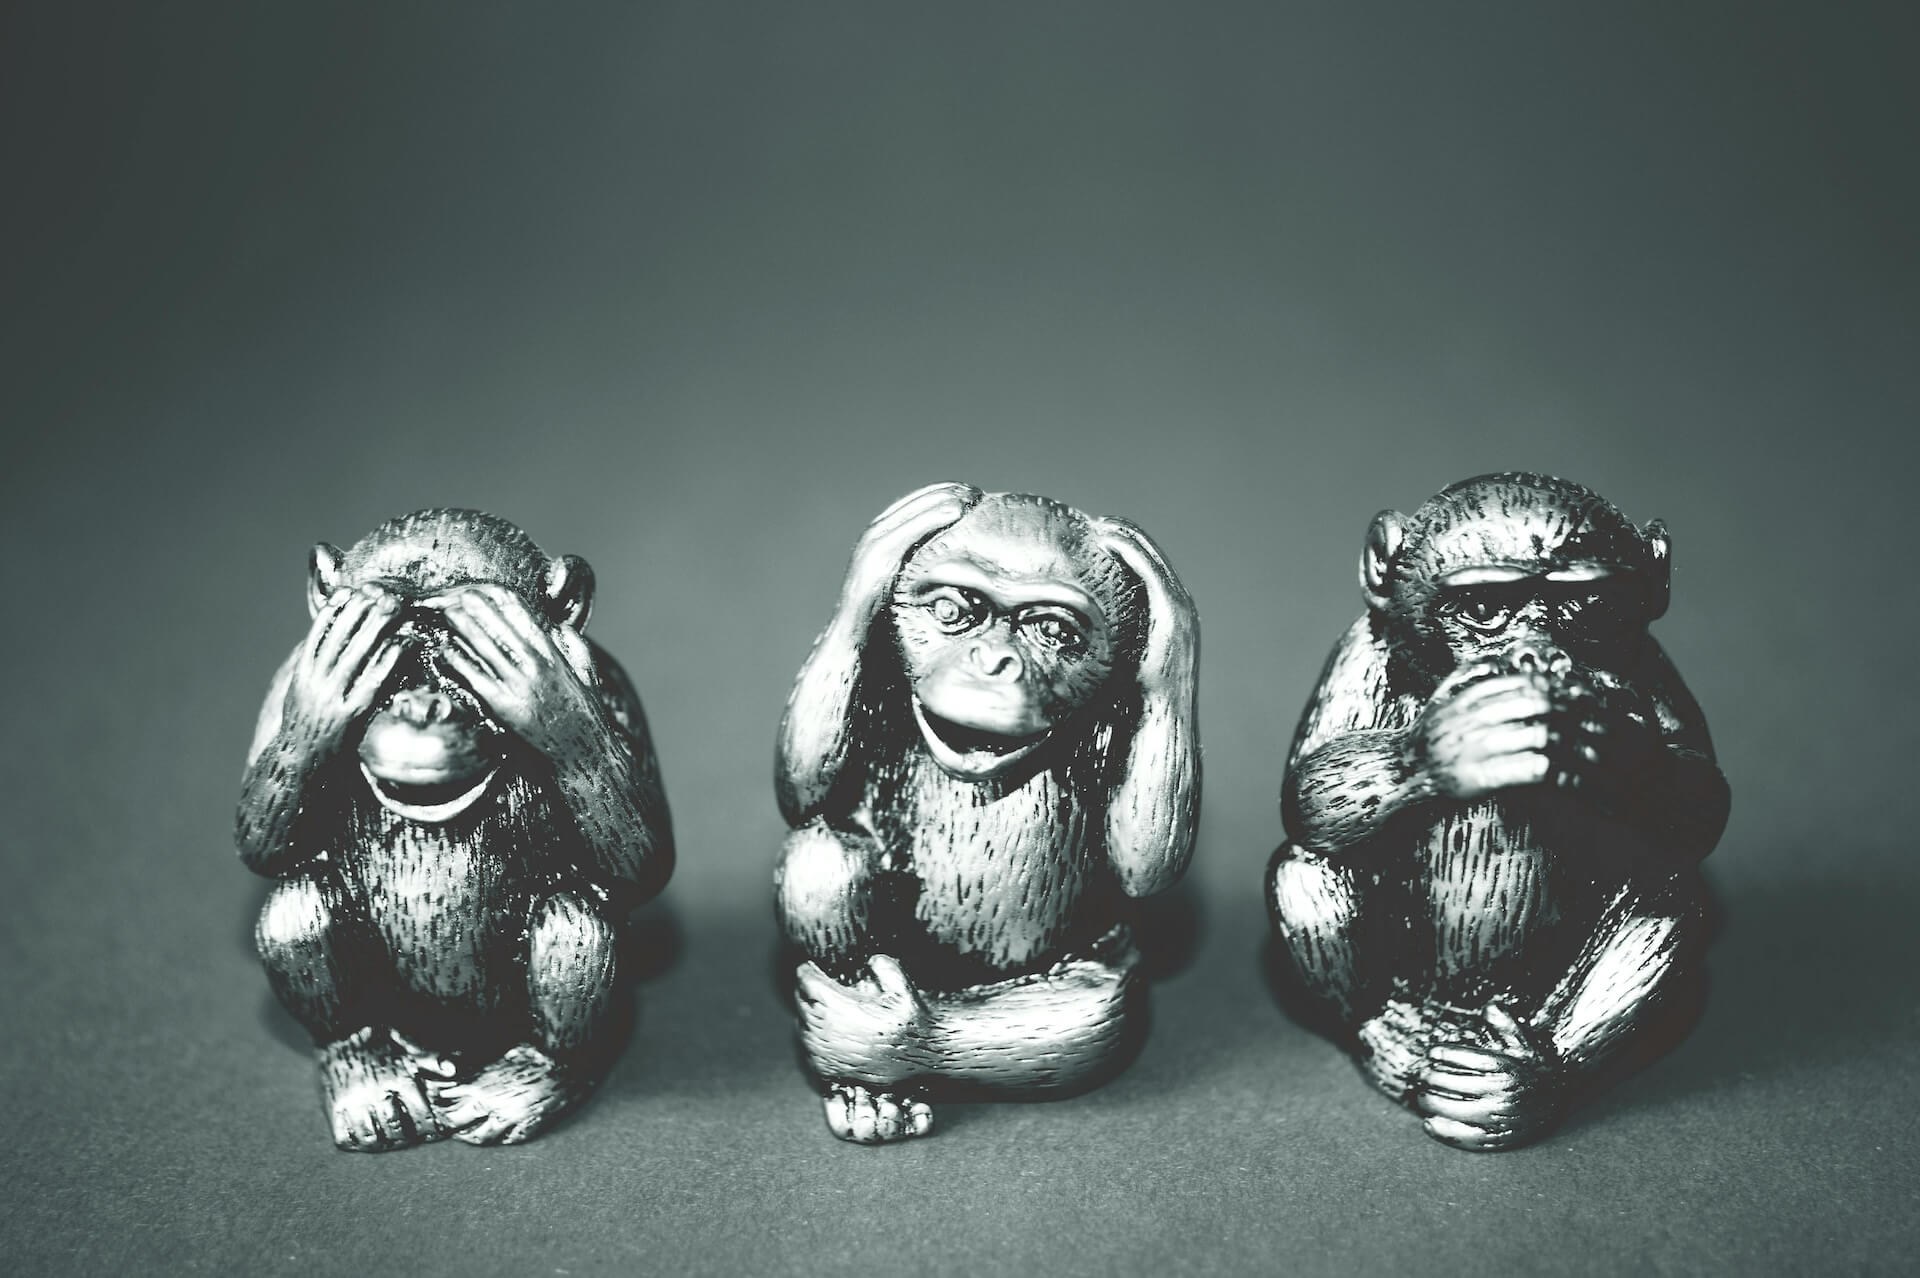 Three wise monkeys pictorial maxin